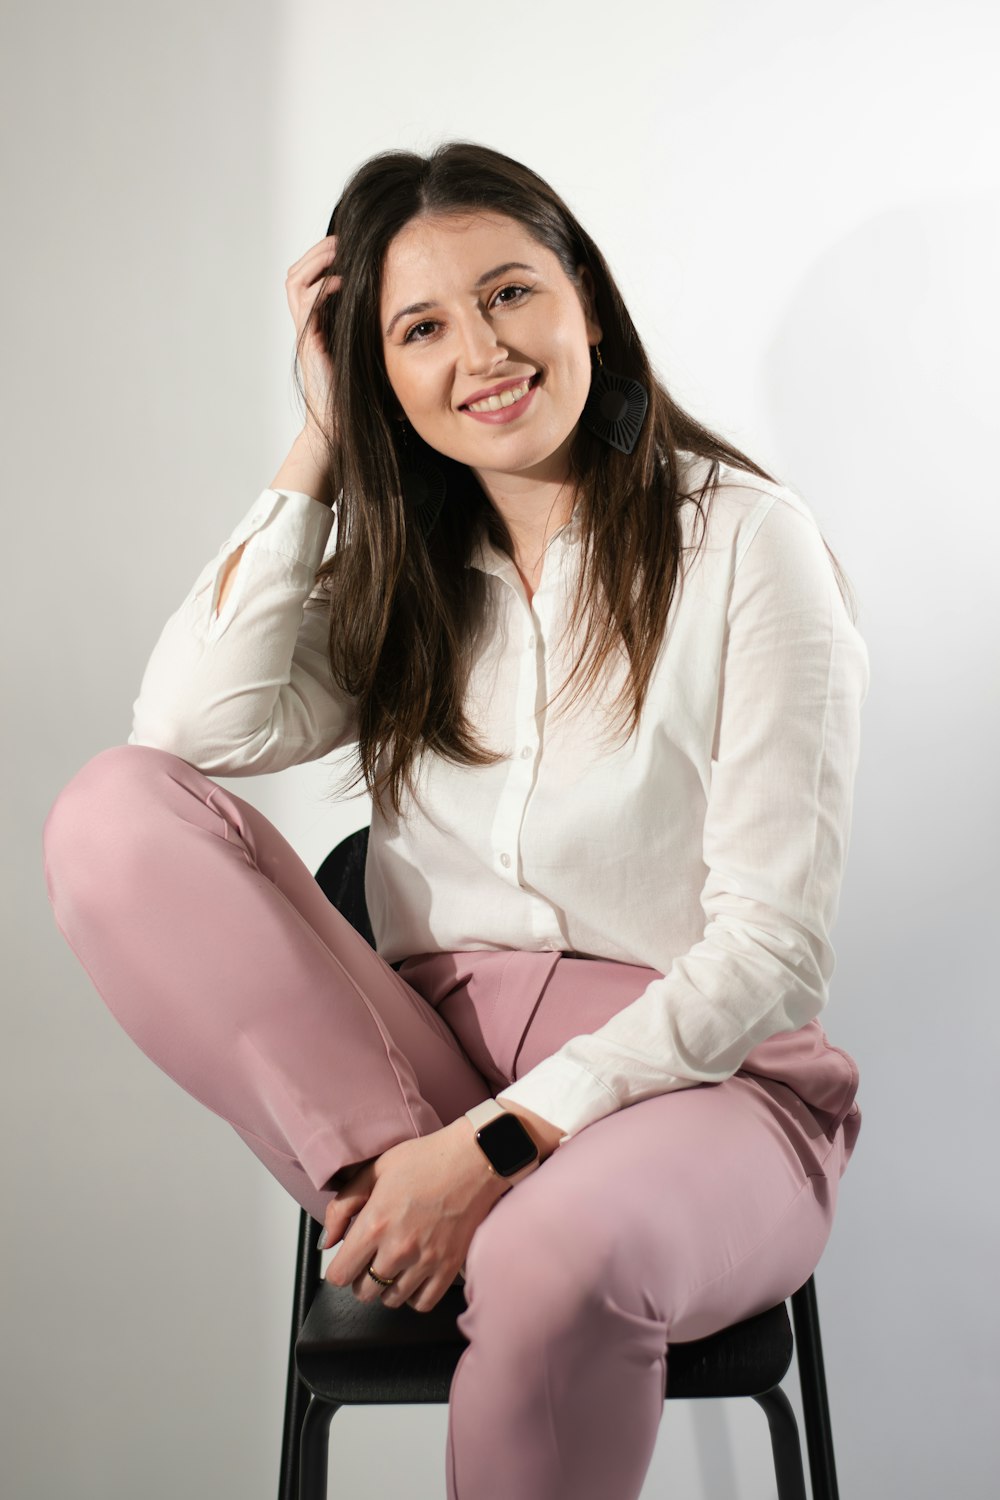 a woman sitting on a chair posing for a picture